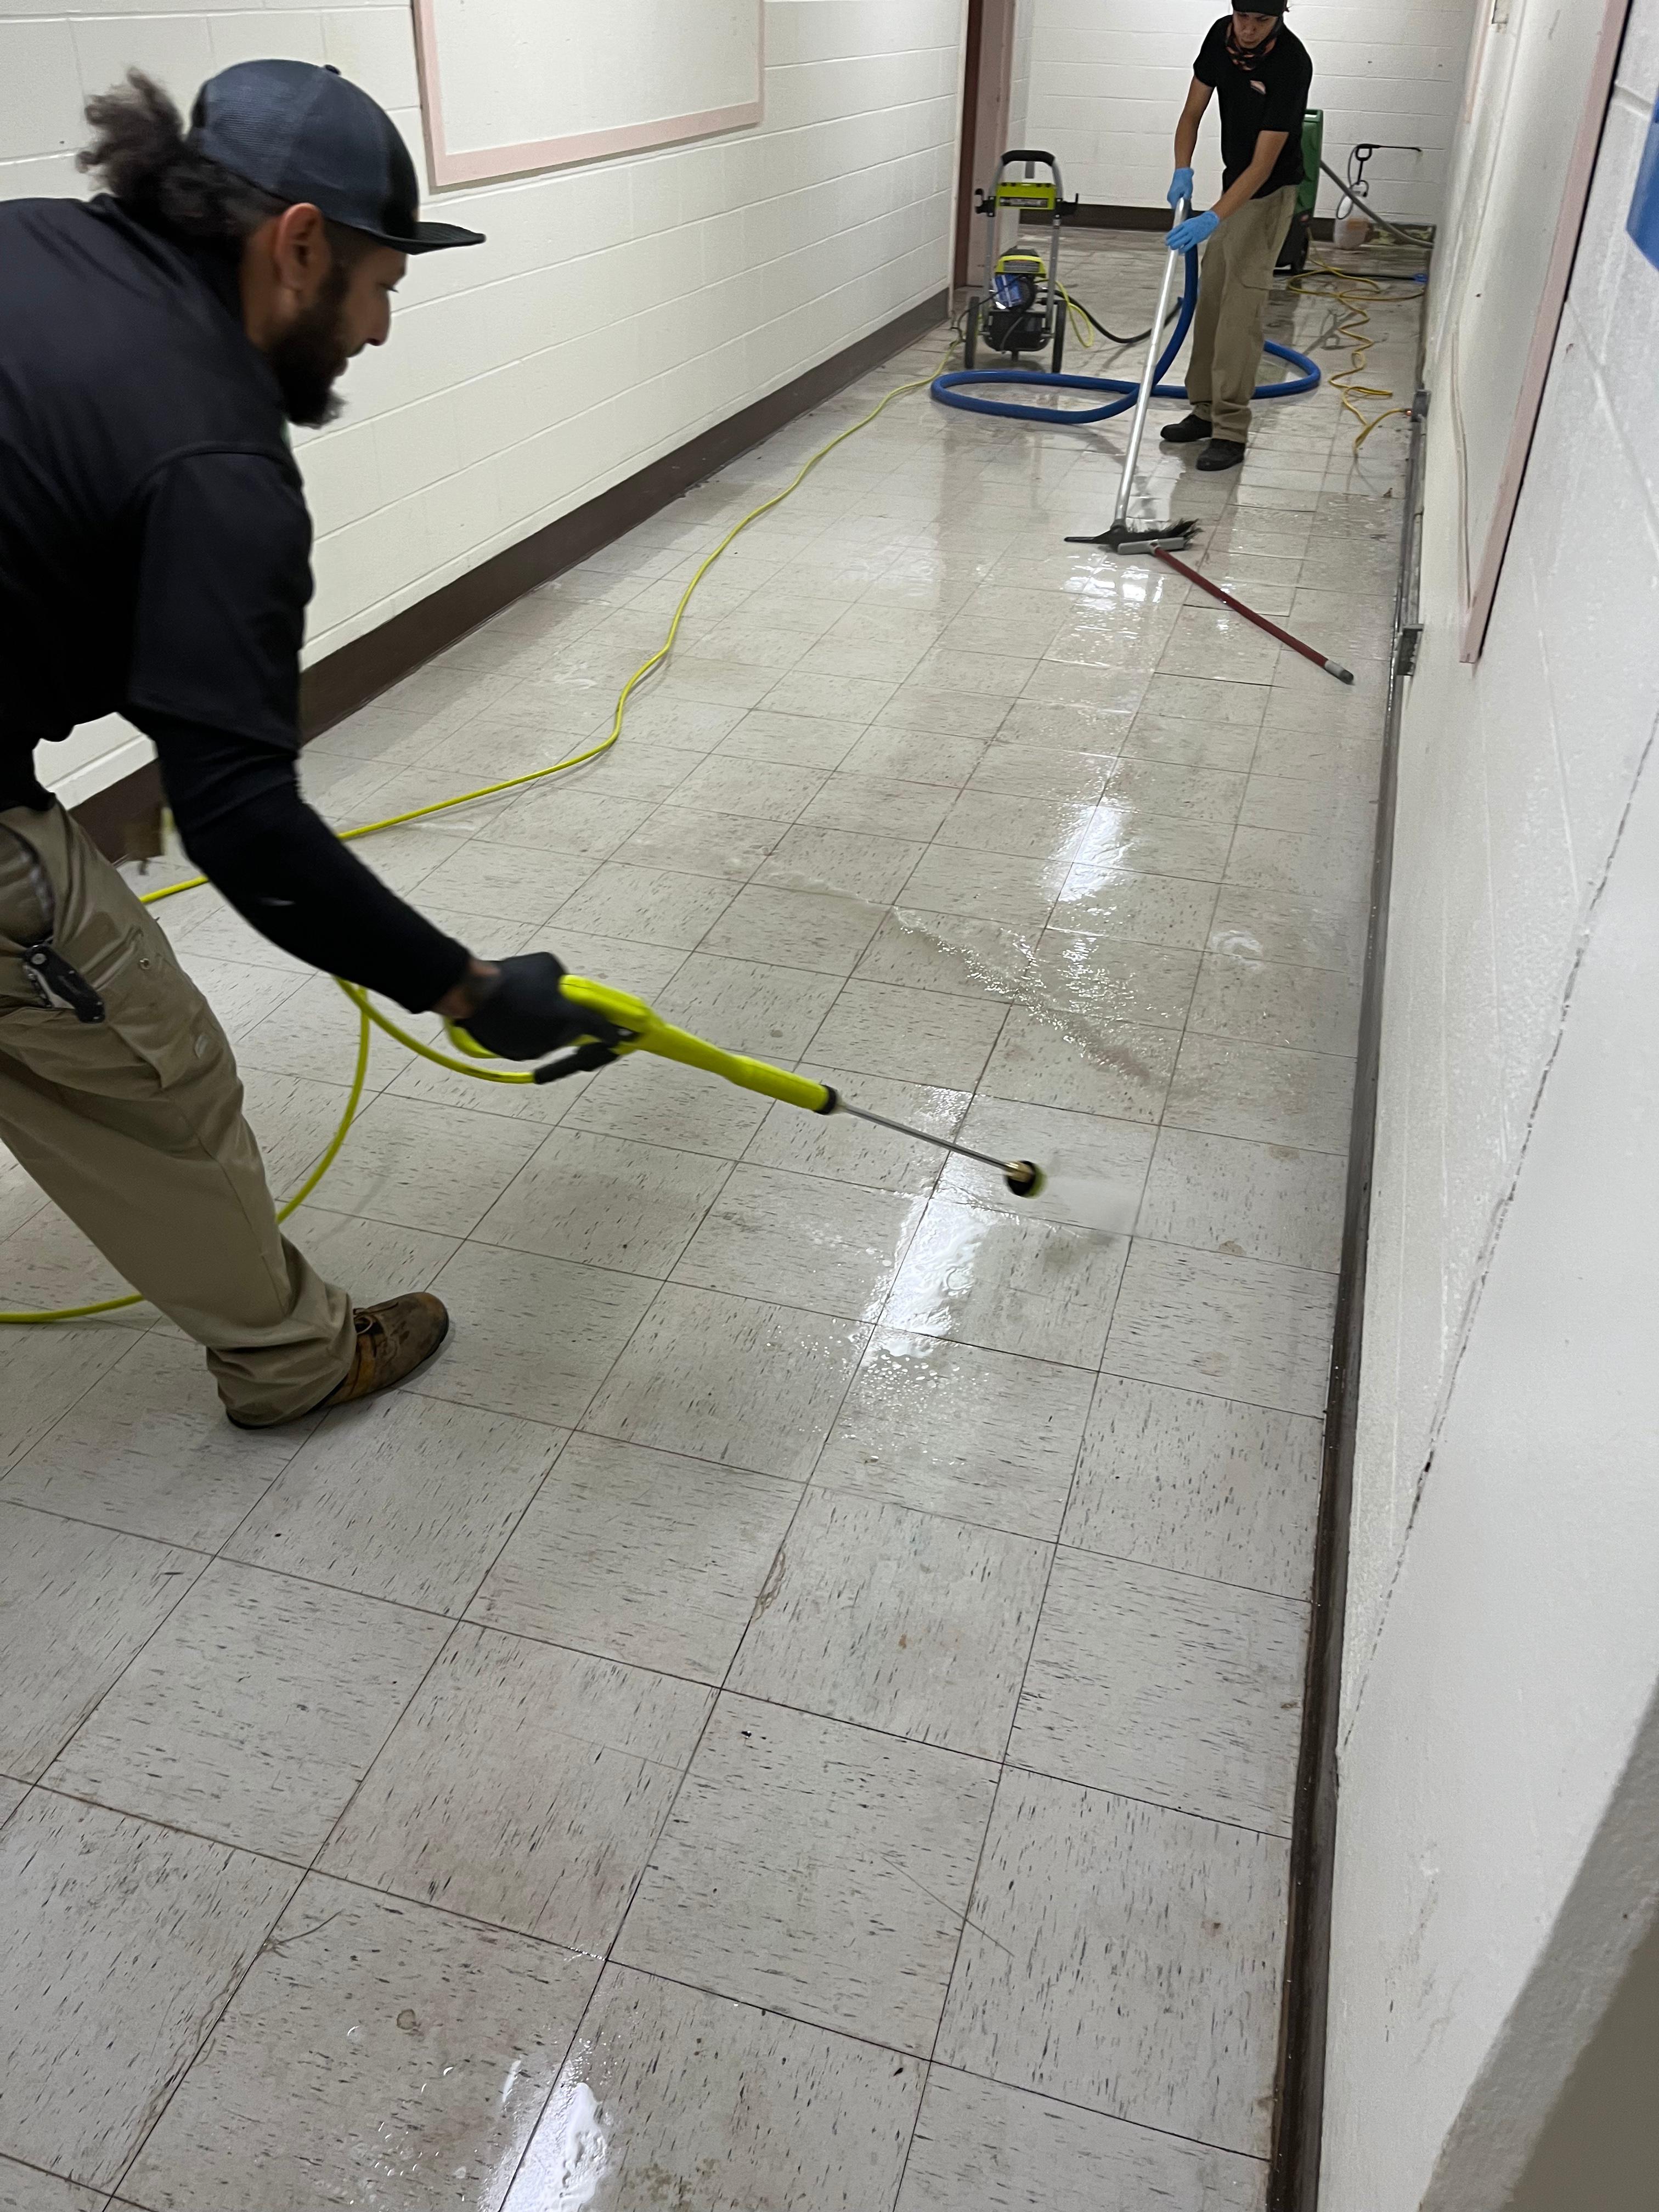 Water emergencies can happen anytime, but SERVPRO of Providence is always ready. Our commercial water loss service is available 24/7 to provide fast and effective restoration solutions for your business. Trust the experts.